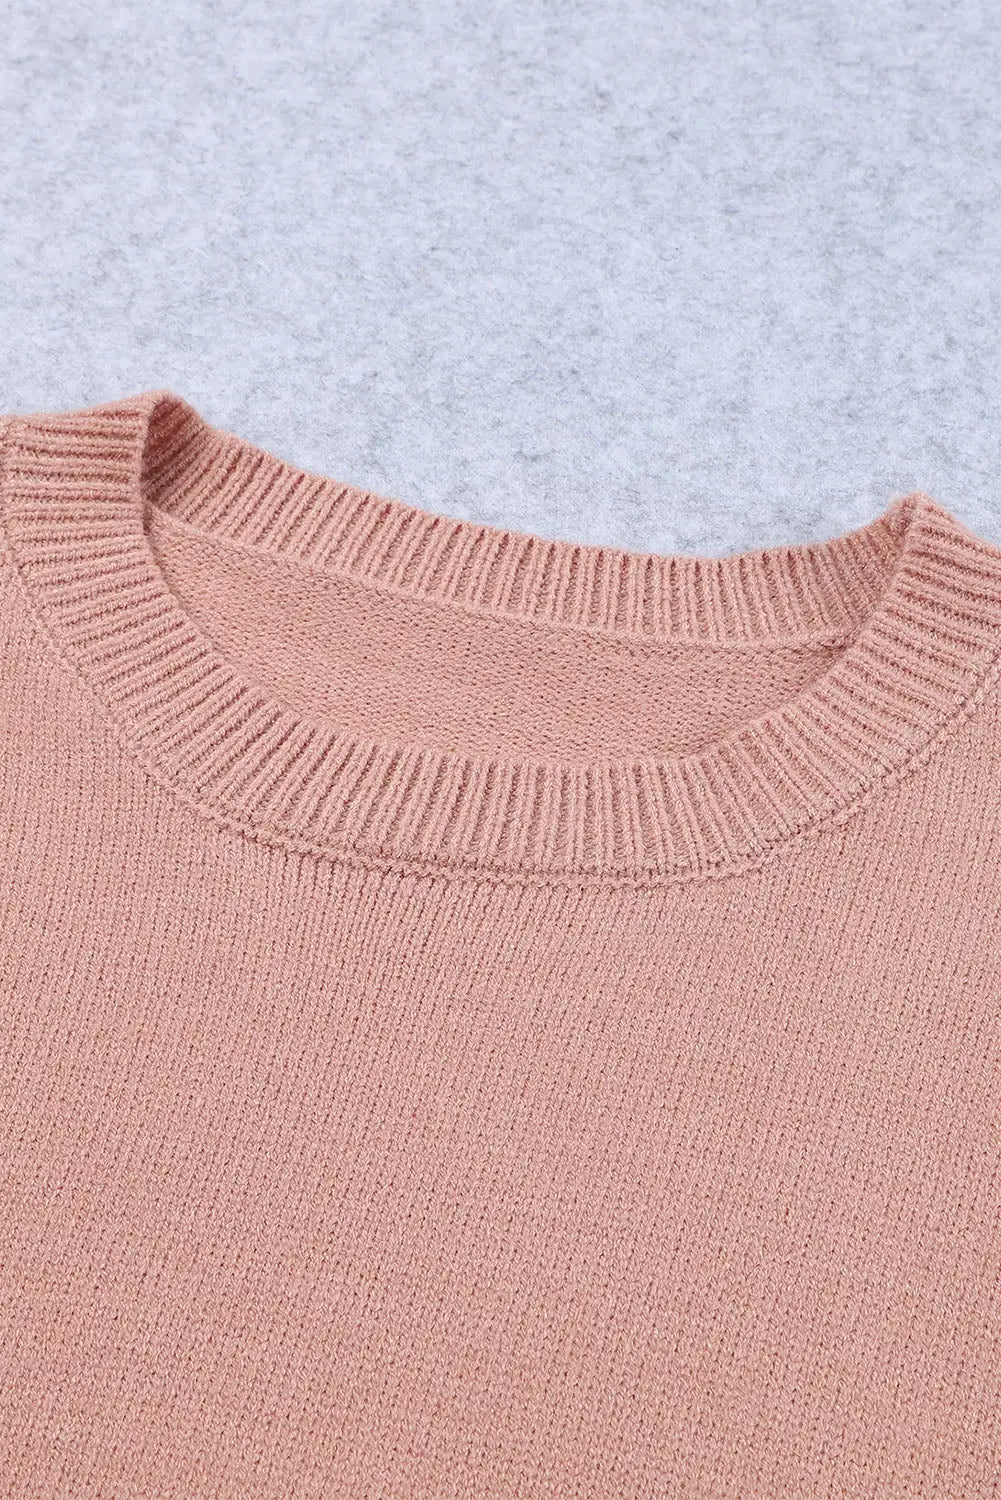 Pink textured bubble sleeve knit sweater - 2xl / 50% viscose + 28% polyester + 22% polyamide - sweaters & cardigans